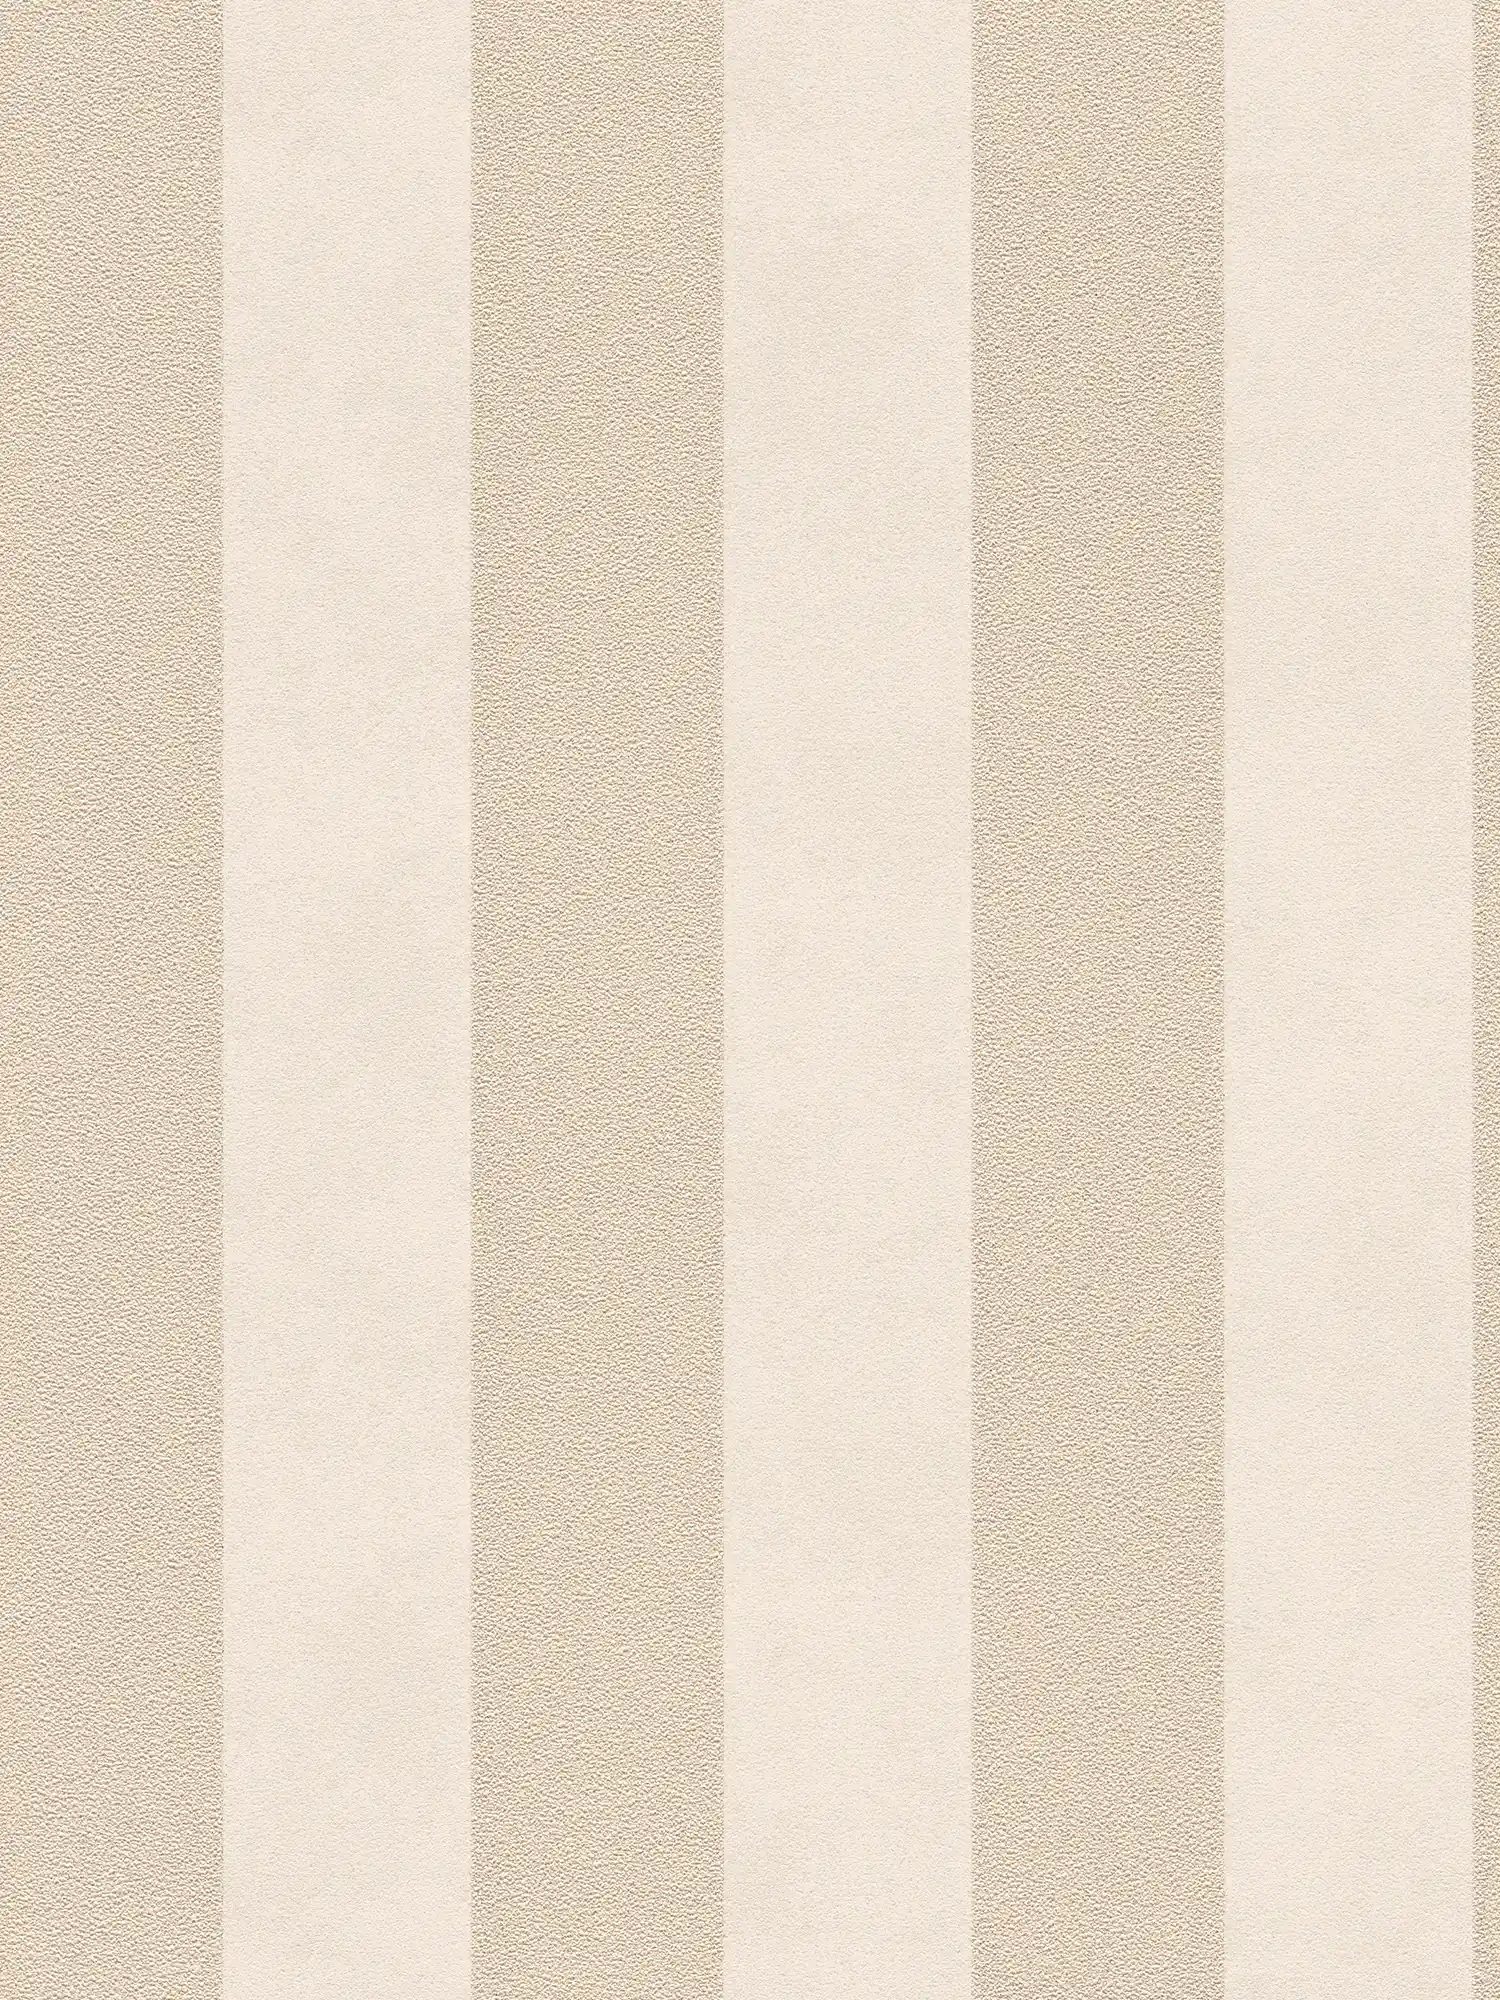 Block stripe wallpaper with colour and texture pattern - beige, gold, cream
